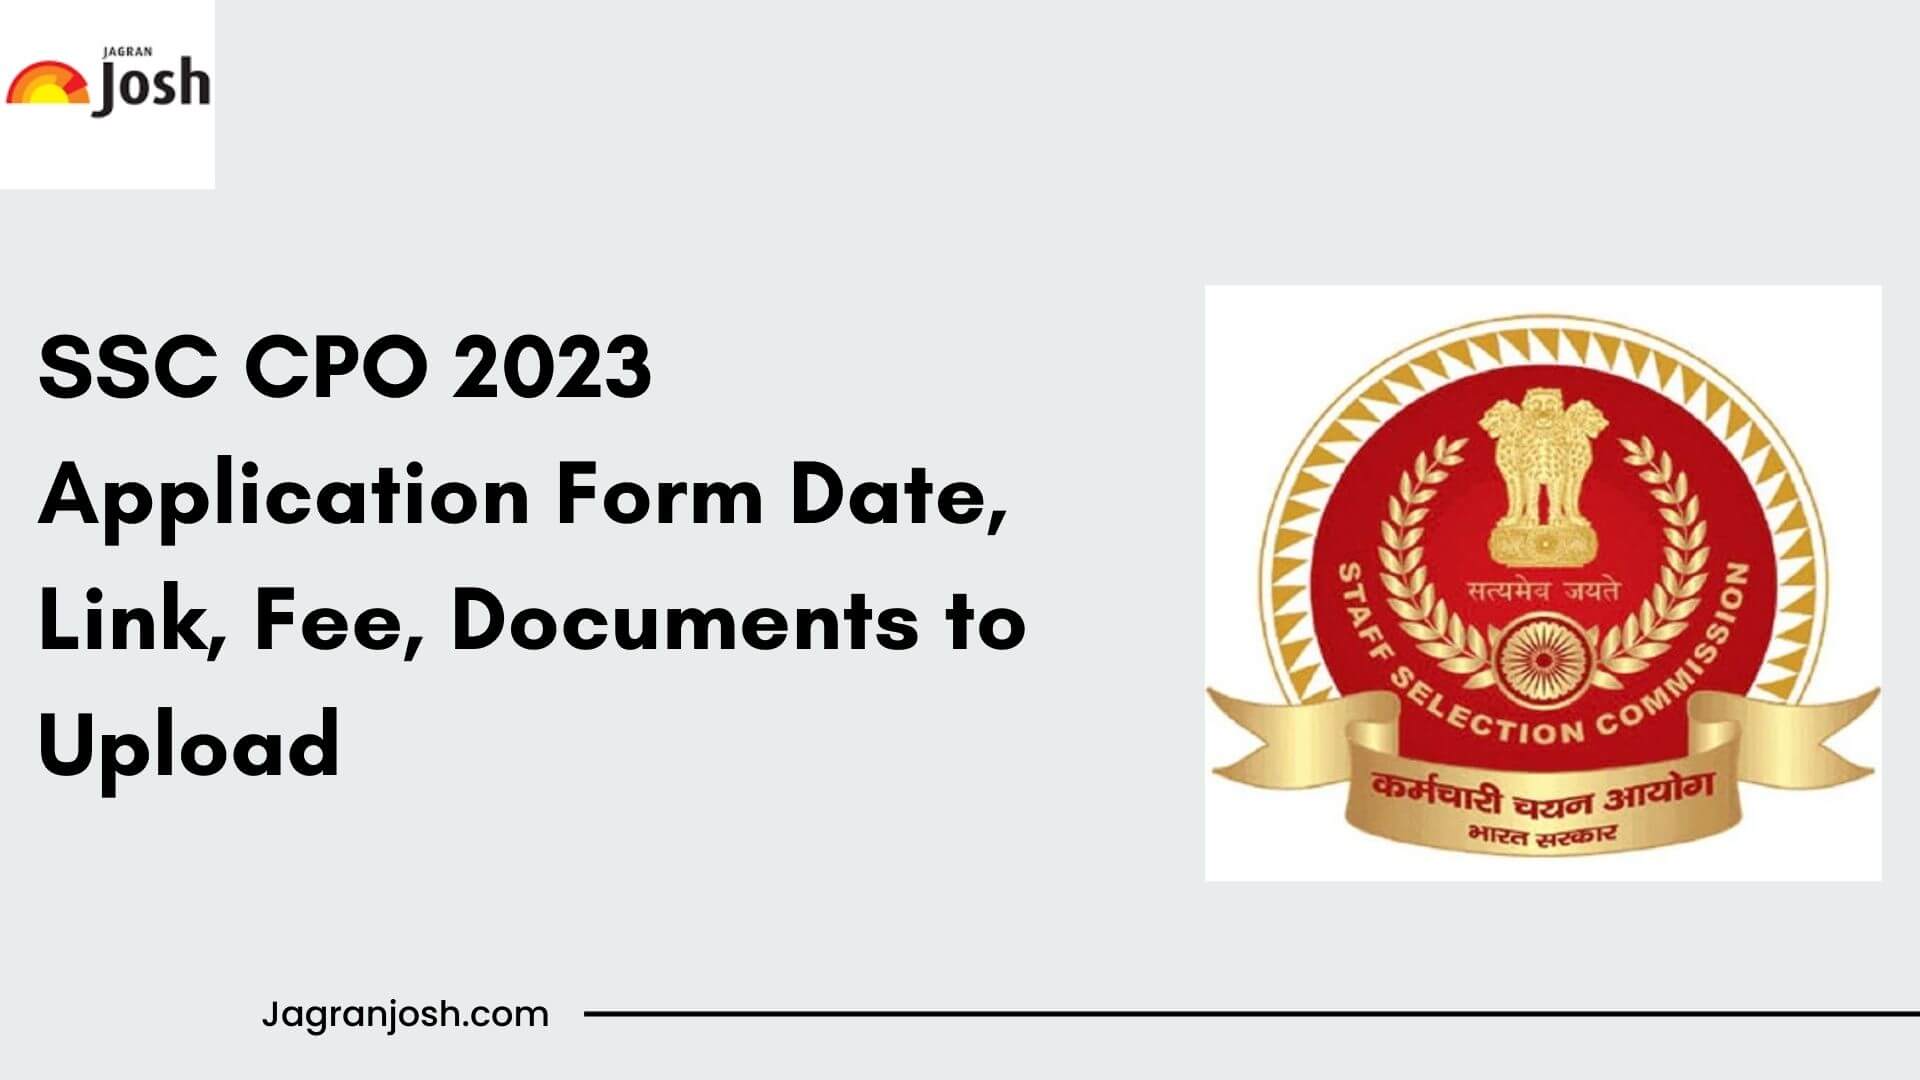 SSC CPO Apply Online 2023 (Active) Start Date, Last Date, Fee